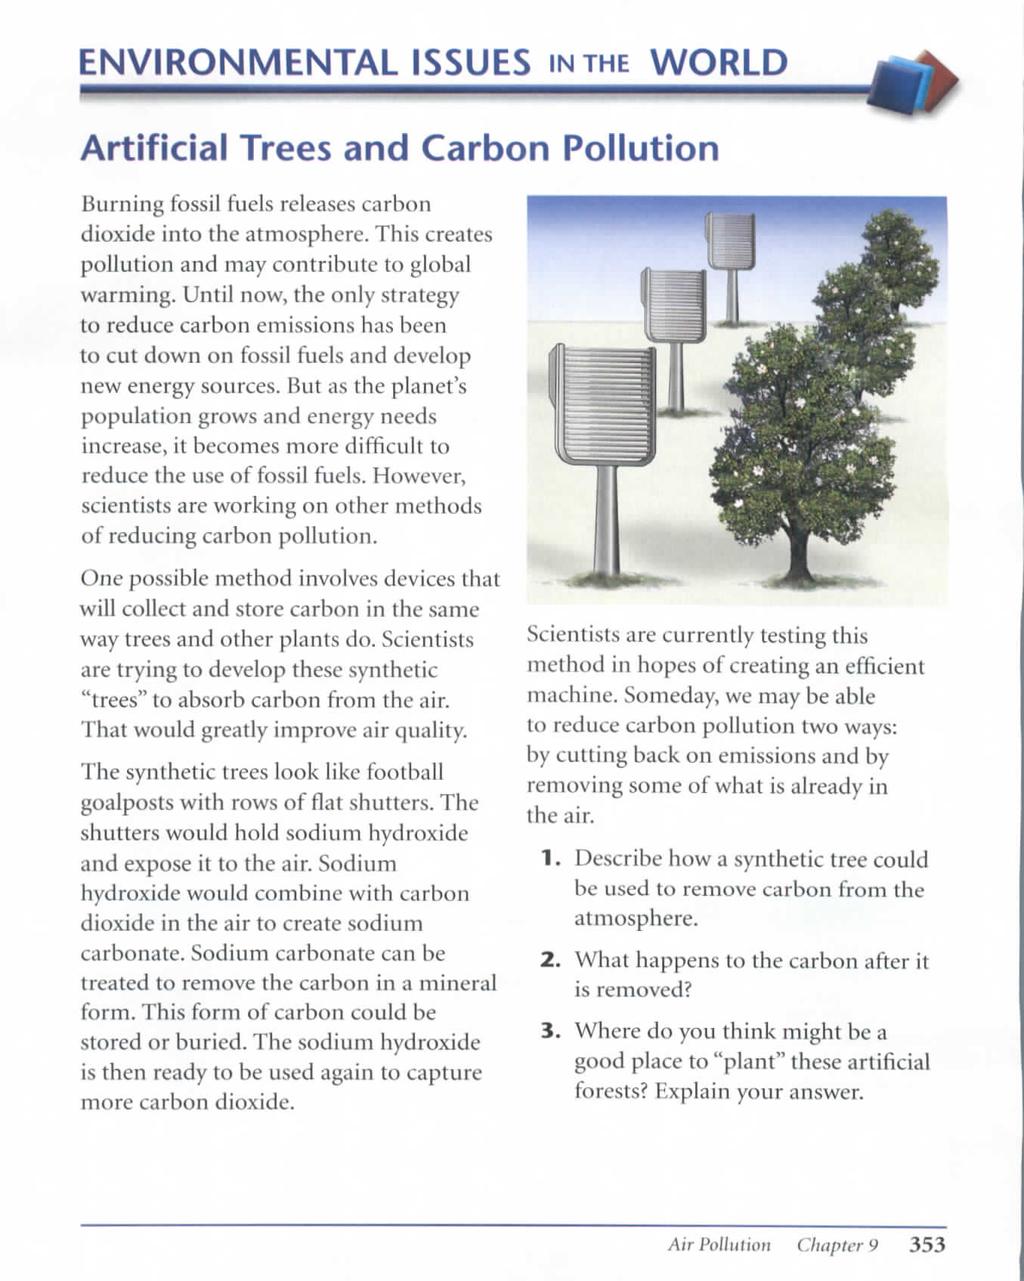 ENVIRONMENTAL ISSUES IN THE WORLD Artificial Trees and Carbon Pollution Burning fossil fuels releases carbon dioxide into the atmosphere. This creates pollution and may contribute to global warming.